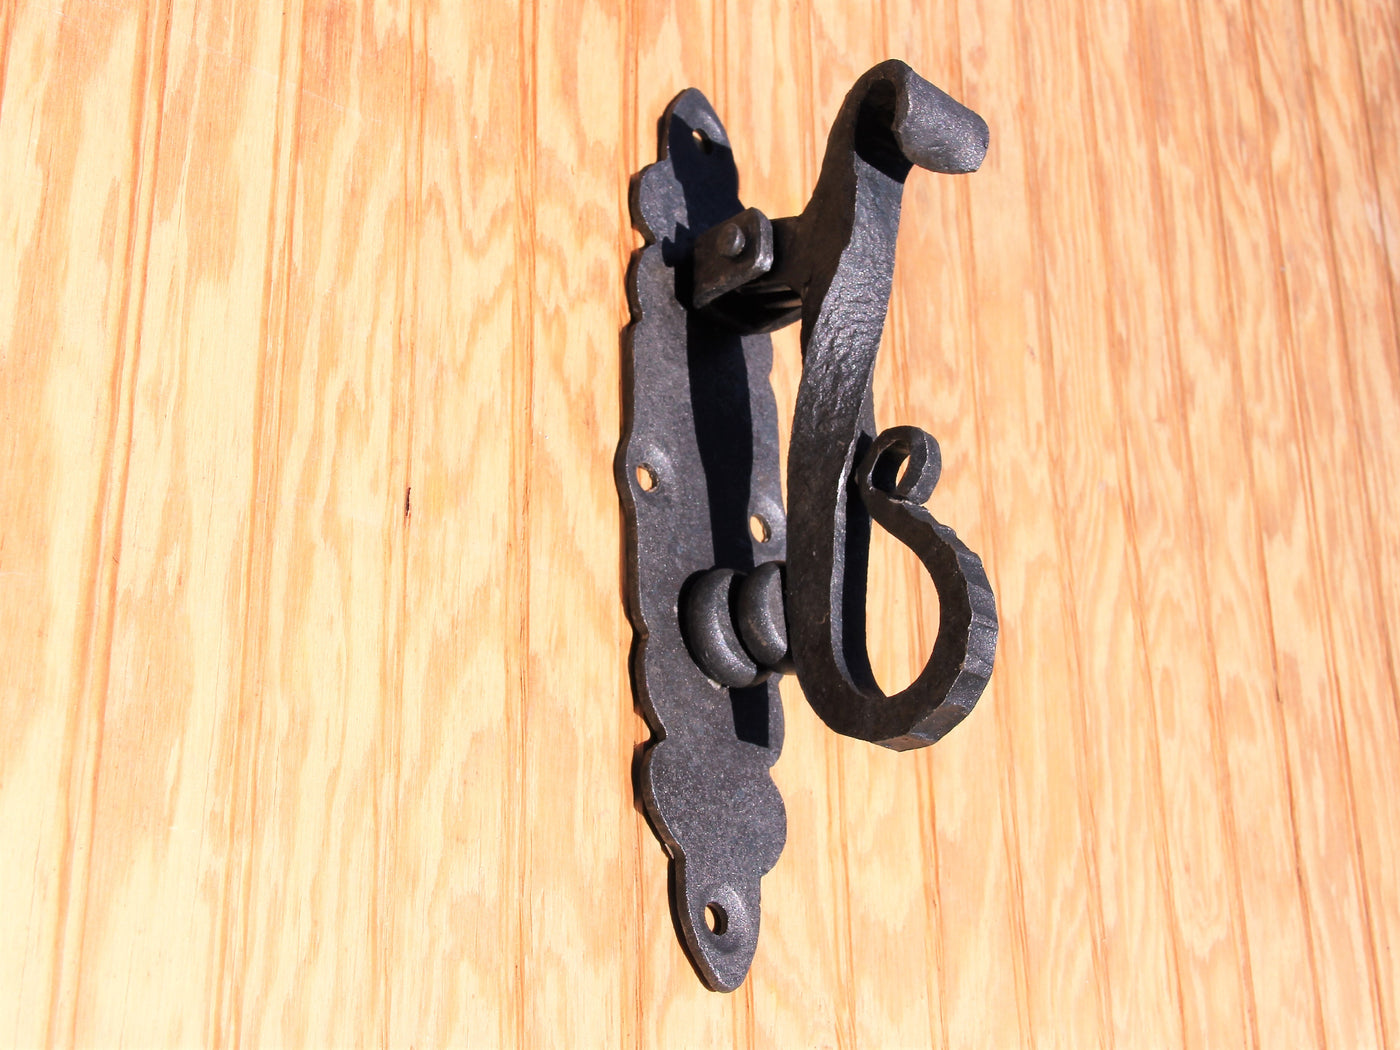 Wrought Iron Door Knocker - Madison Iron and Wood - Knocker - metal outdoor decor - Steel deocrations - american made products - veteran owned business products - fencing decorations - fencing supplies - custom wall decorations - personalized wall signs - steel - decorative post caps - steel post caps - metal post caps - brackets - structural brackets - home improvement - easter - easter decorations - easter gift - easter yard decor